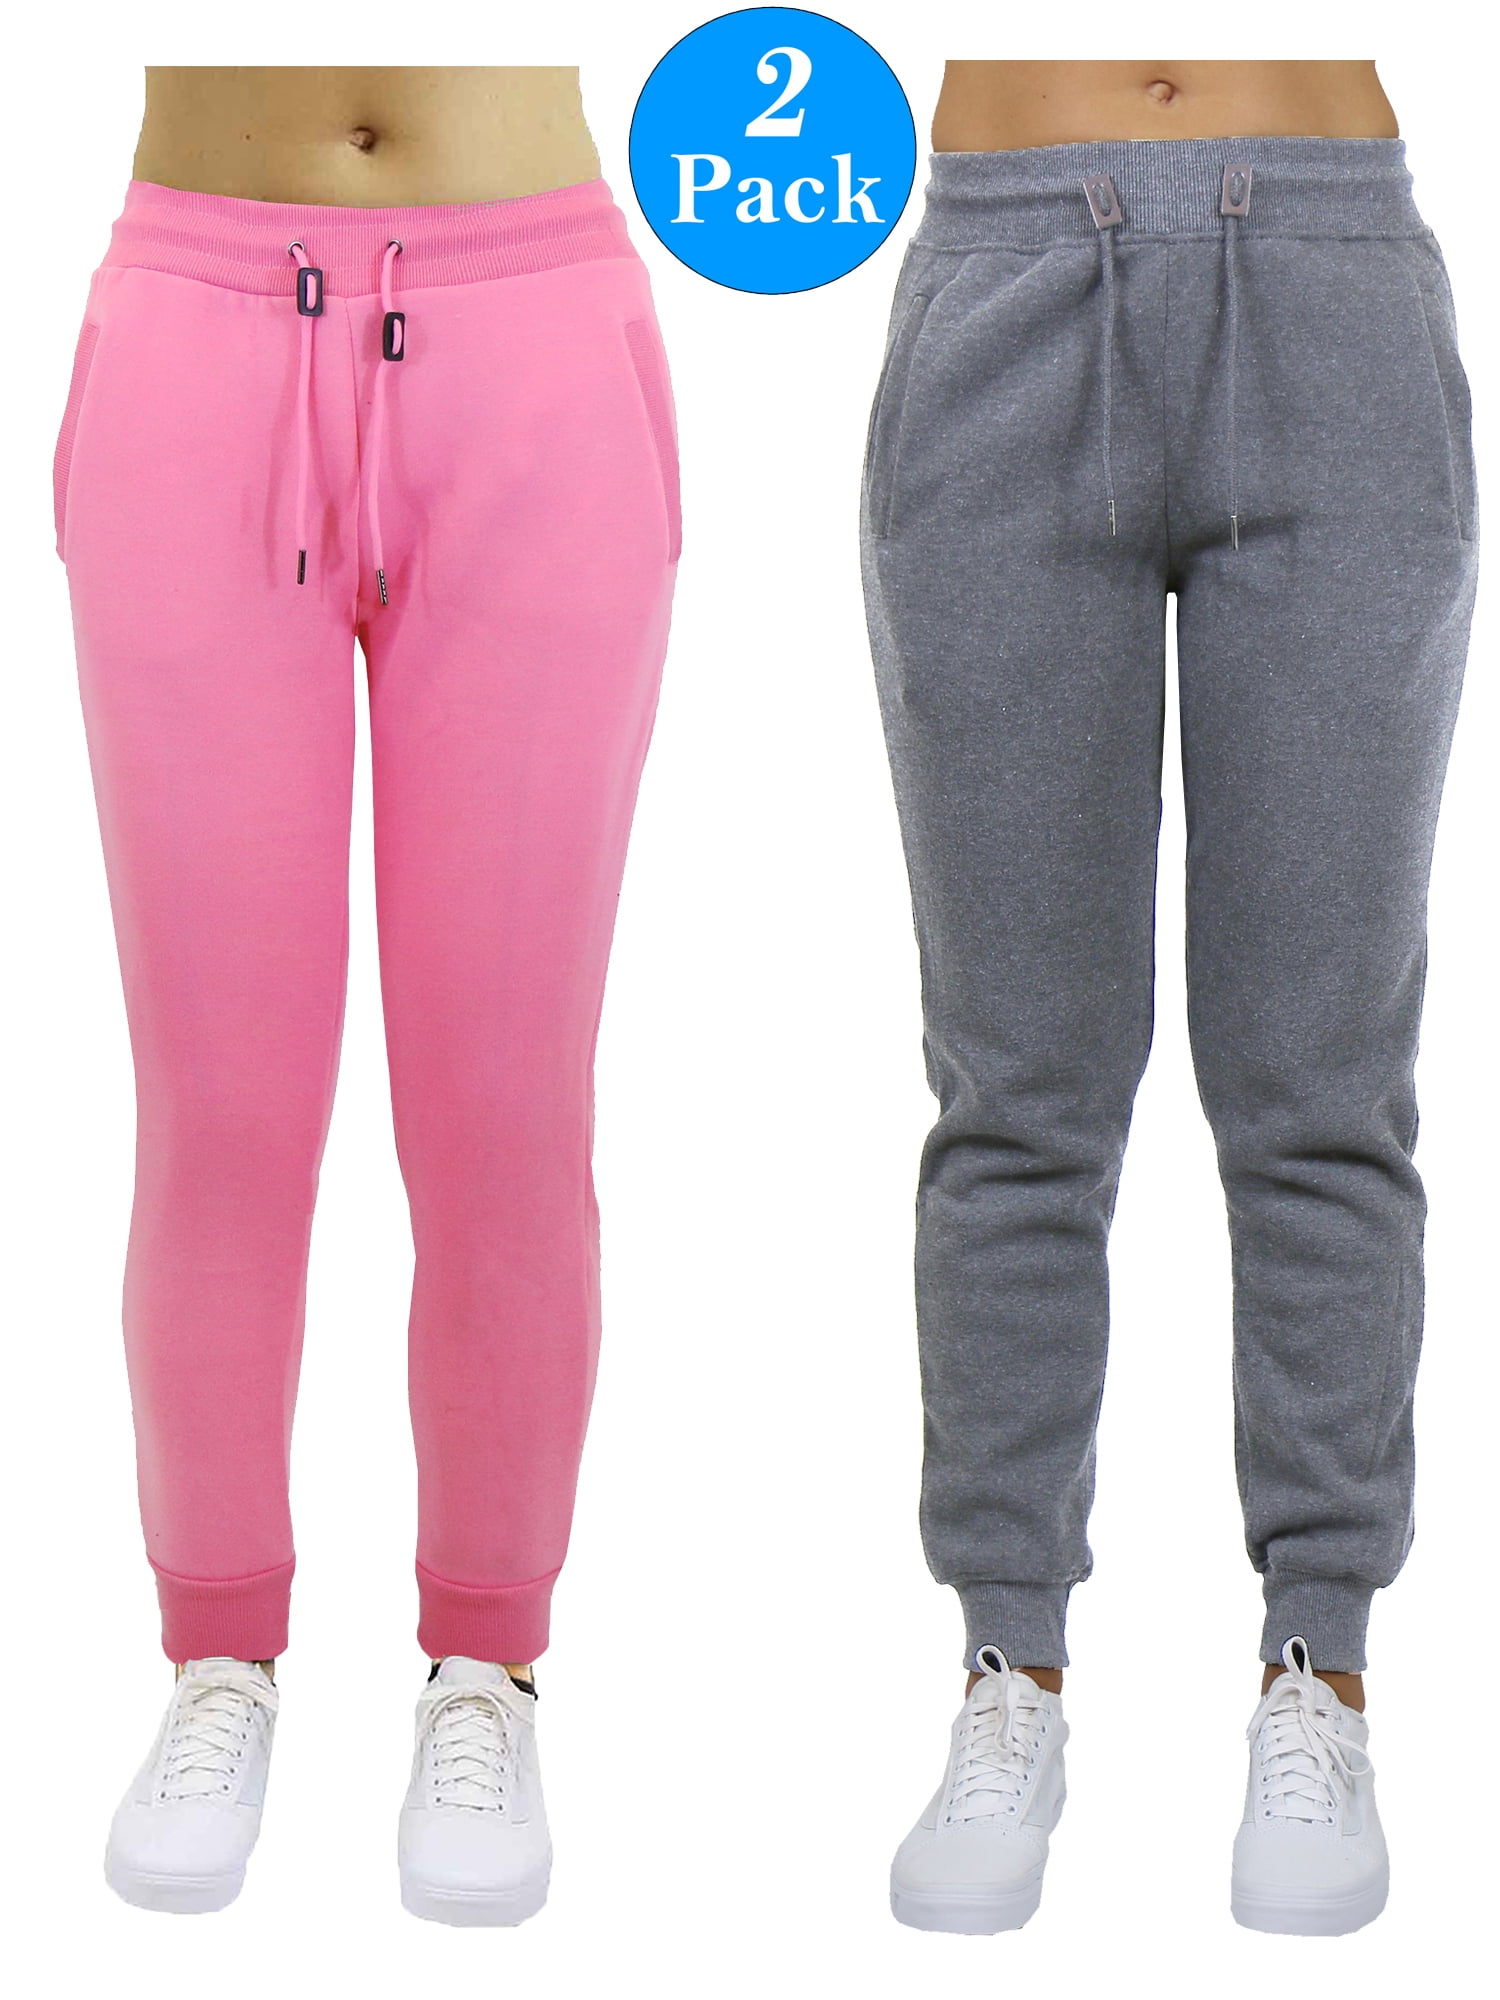 Gbh Womens Fleece Jogger Sweatpants With 2 Pack Slim Fit